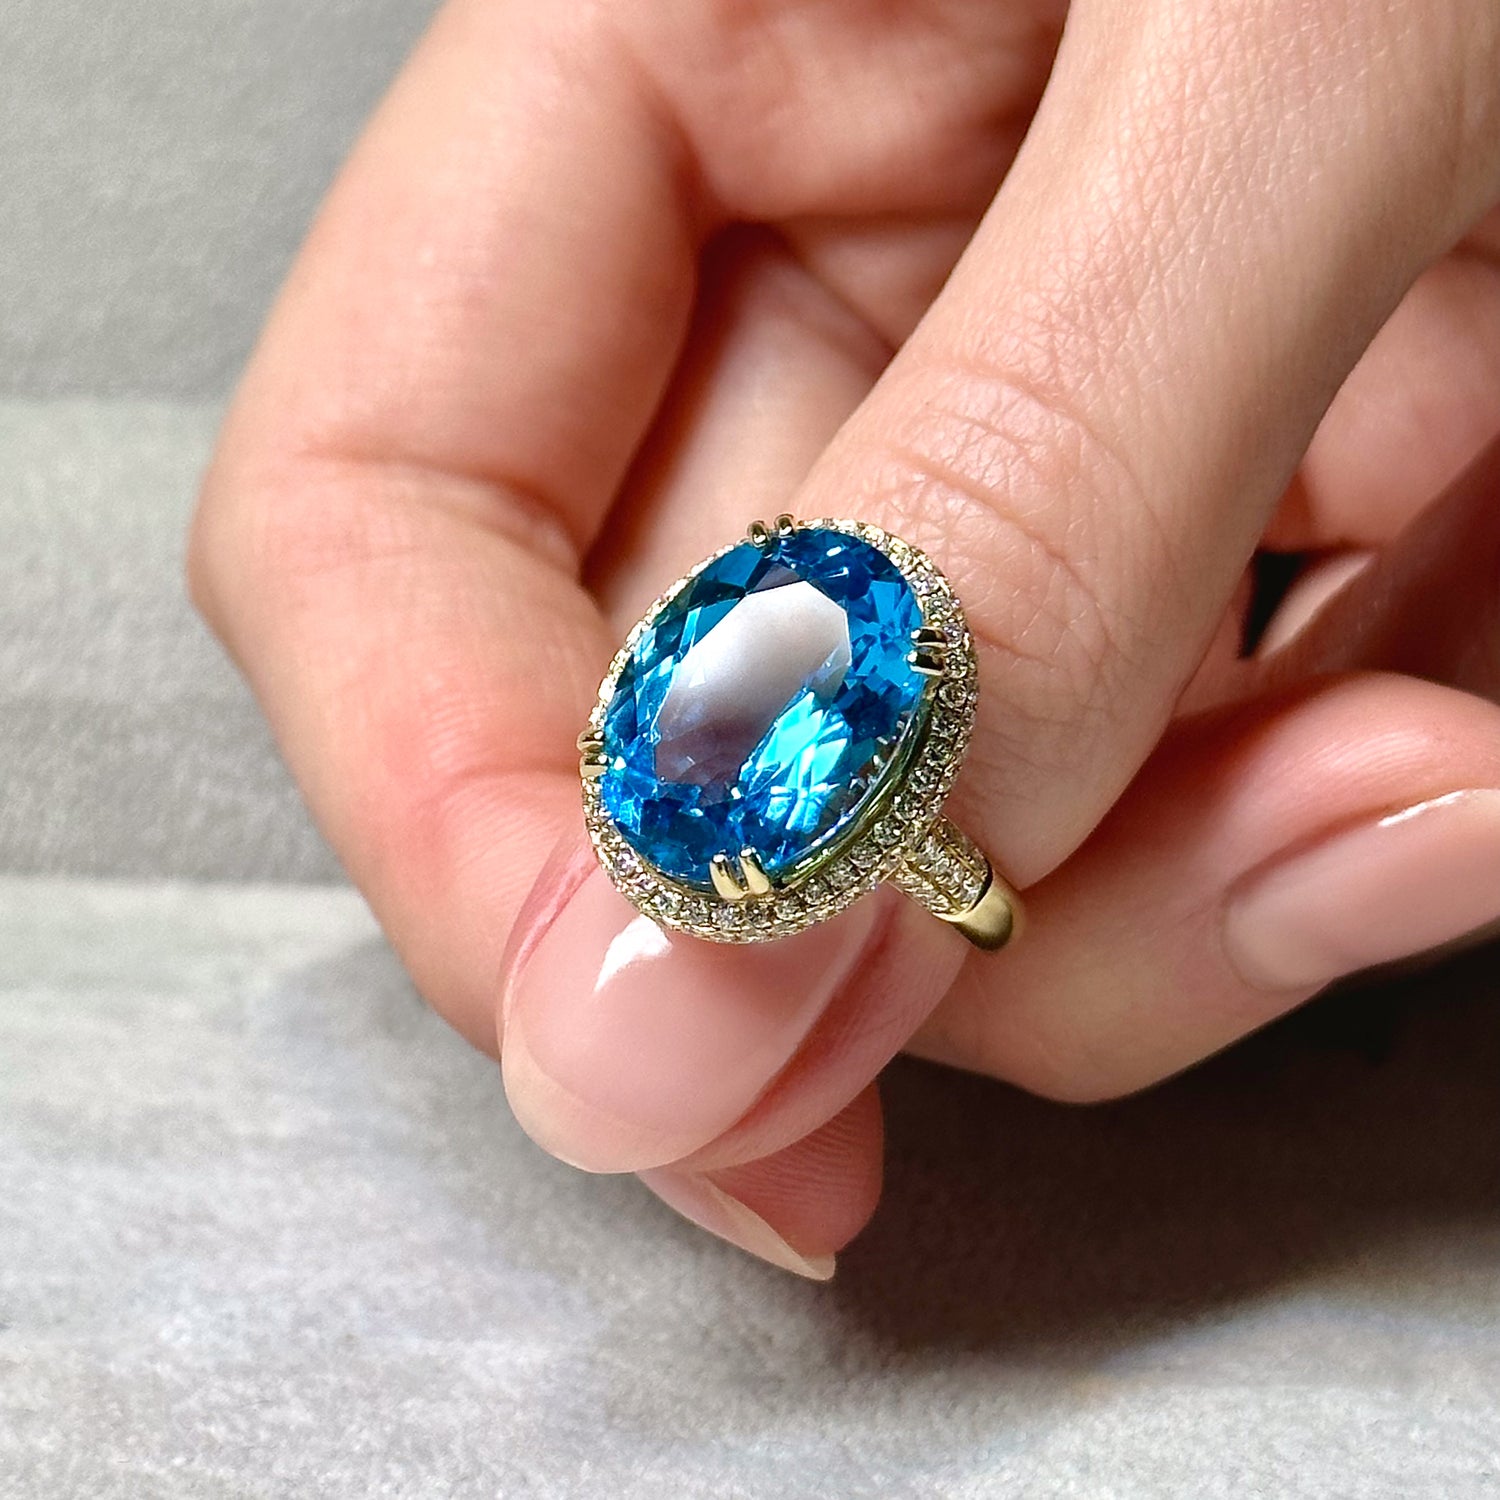 Blue Topaz Oval Cut Ring with Diamonds